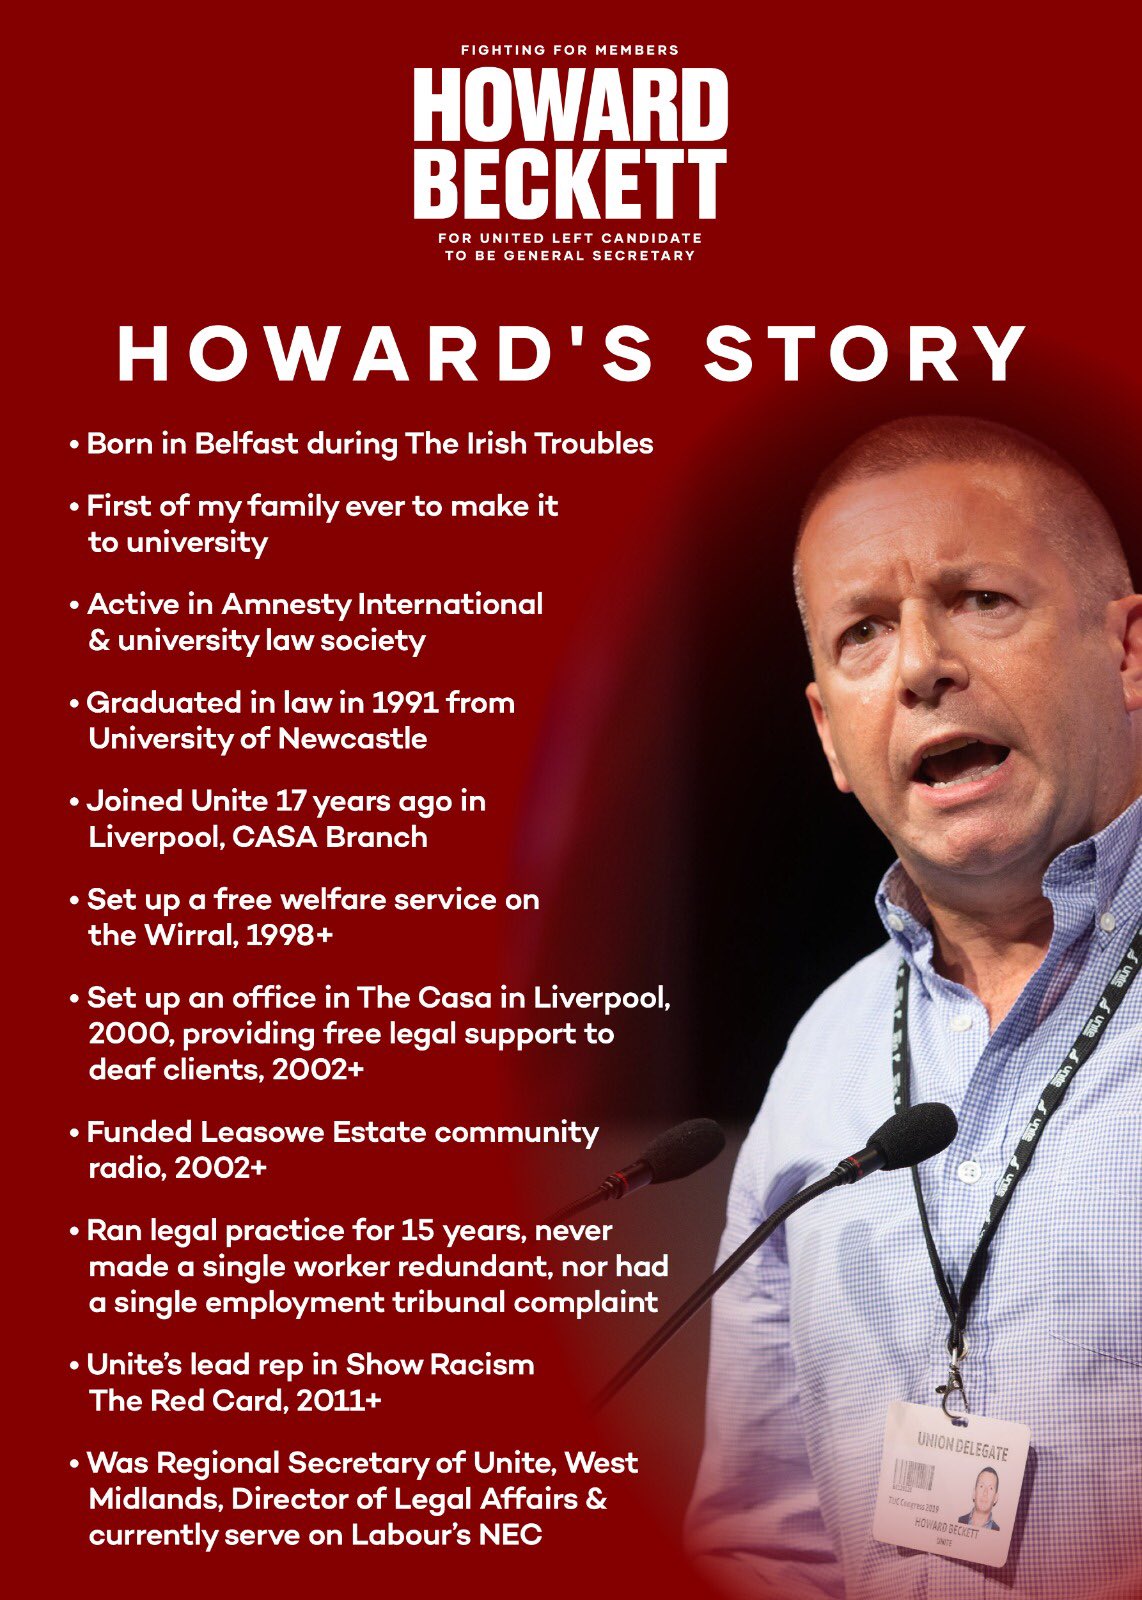 Howard Beckett On Twitter This Saturday The United Left Will Select Its Candidate To Be The Next General Secretary Of Unite Here Is My Story Of The Journey I Took To Putting